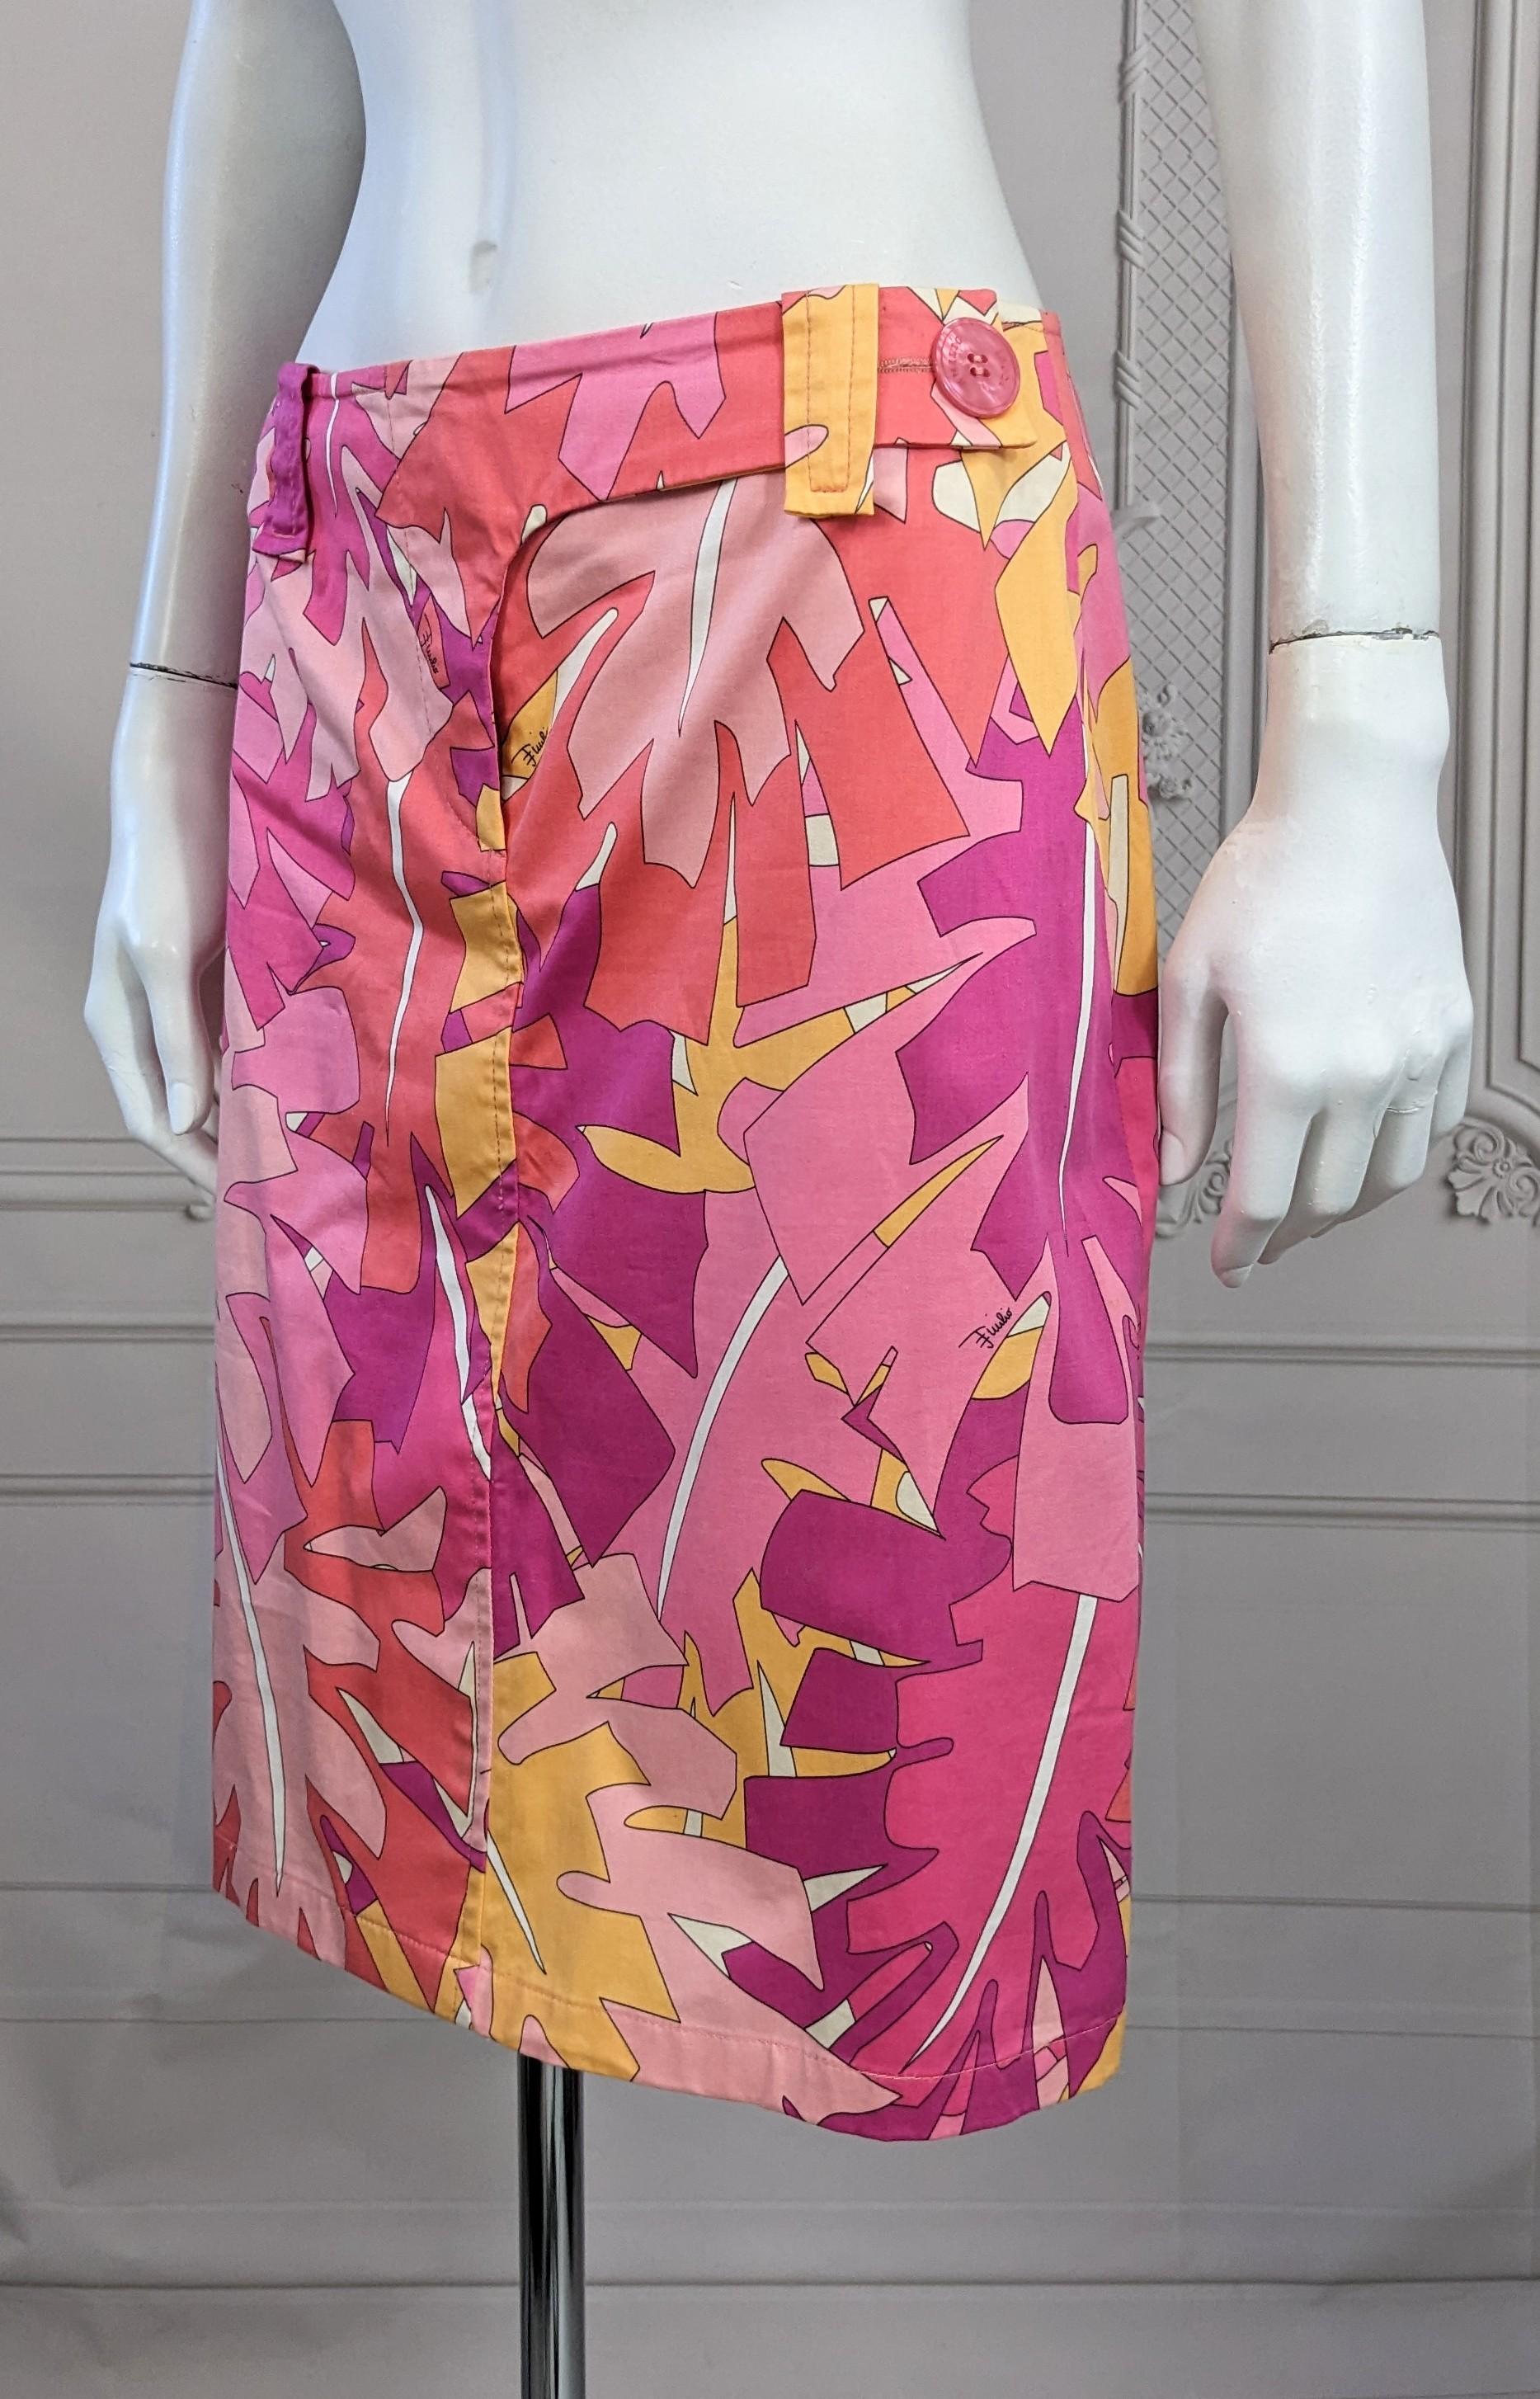 Emilio Pucci Leaf Print Skirt  In Excellent Condition For Sale In New York, NY